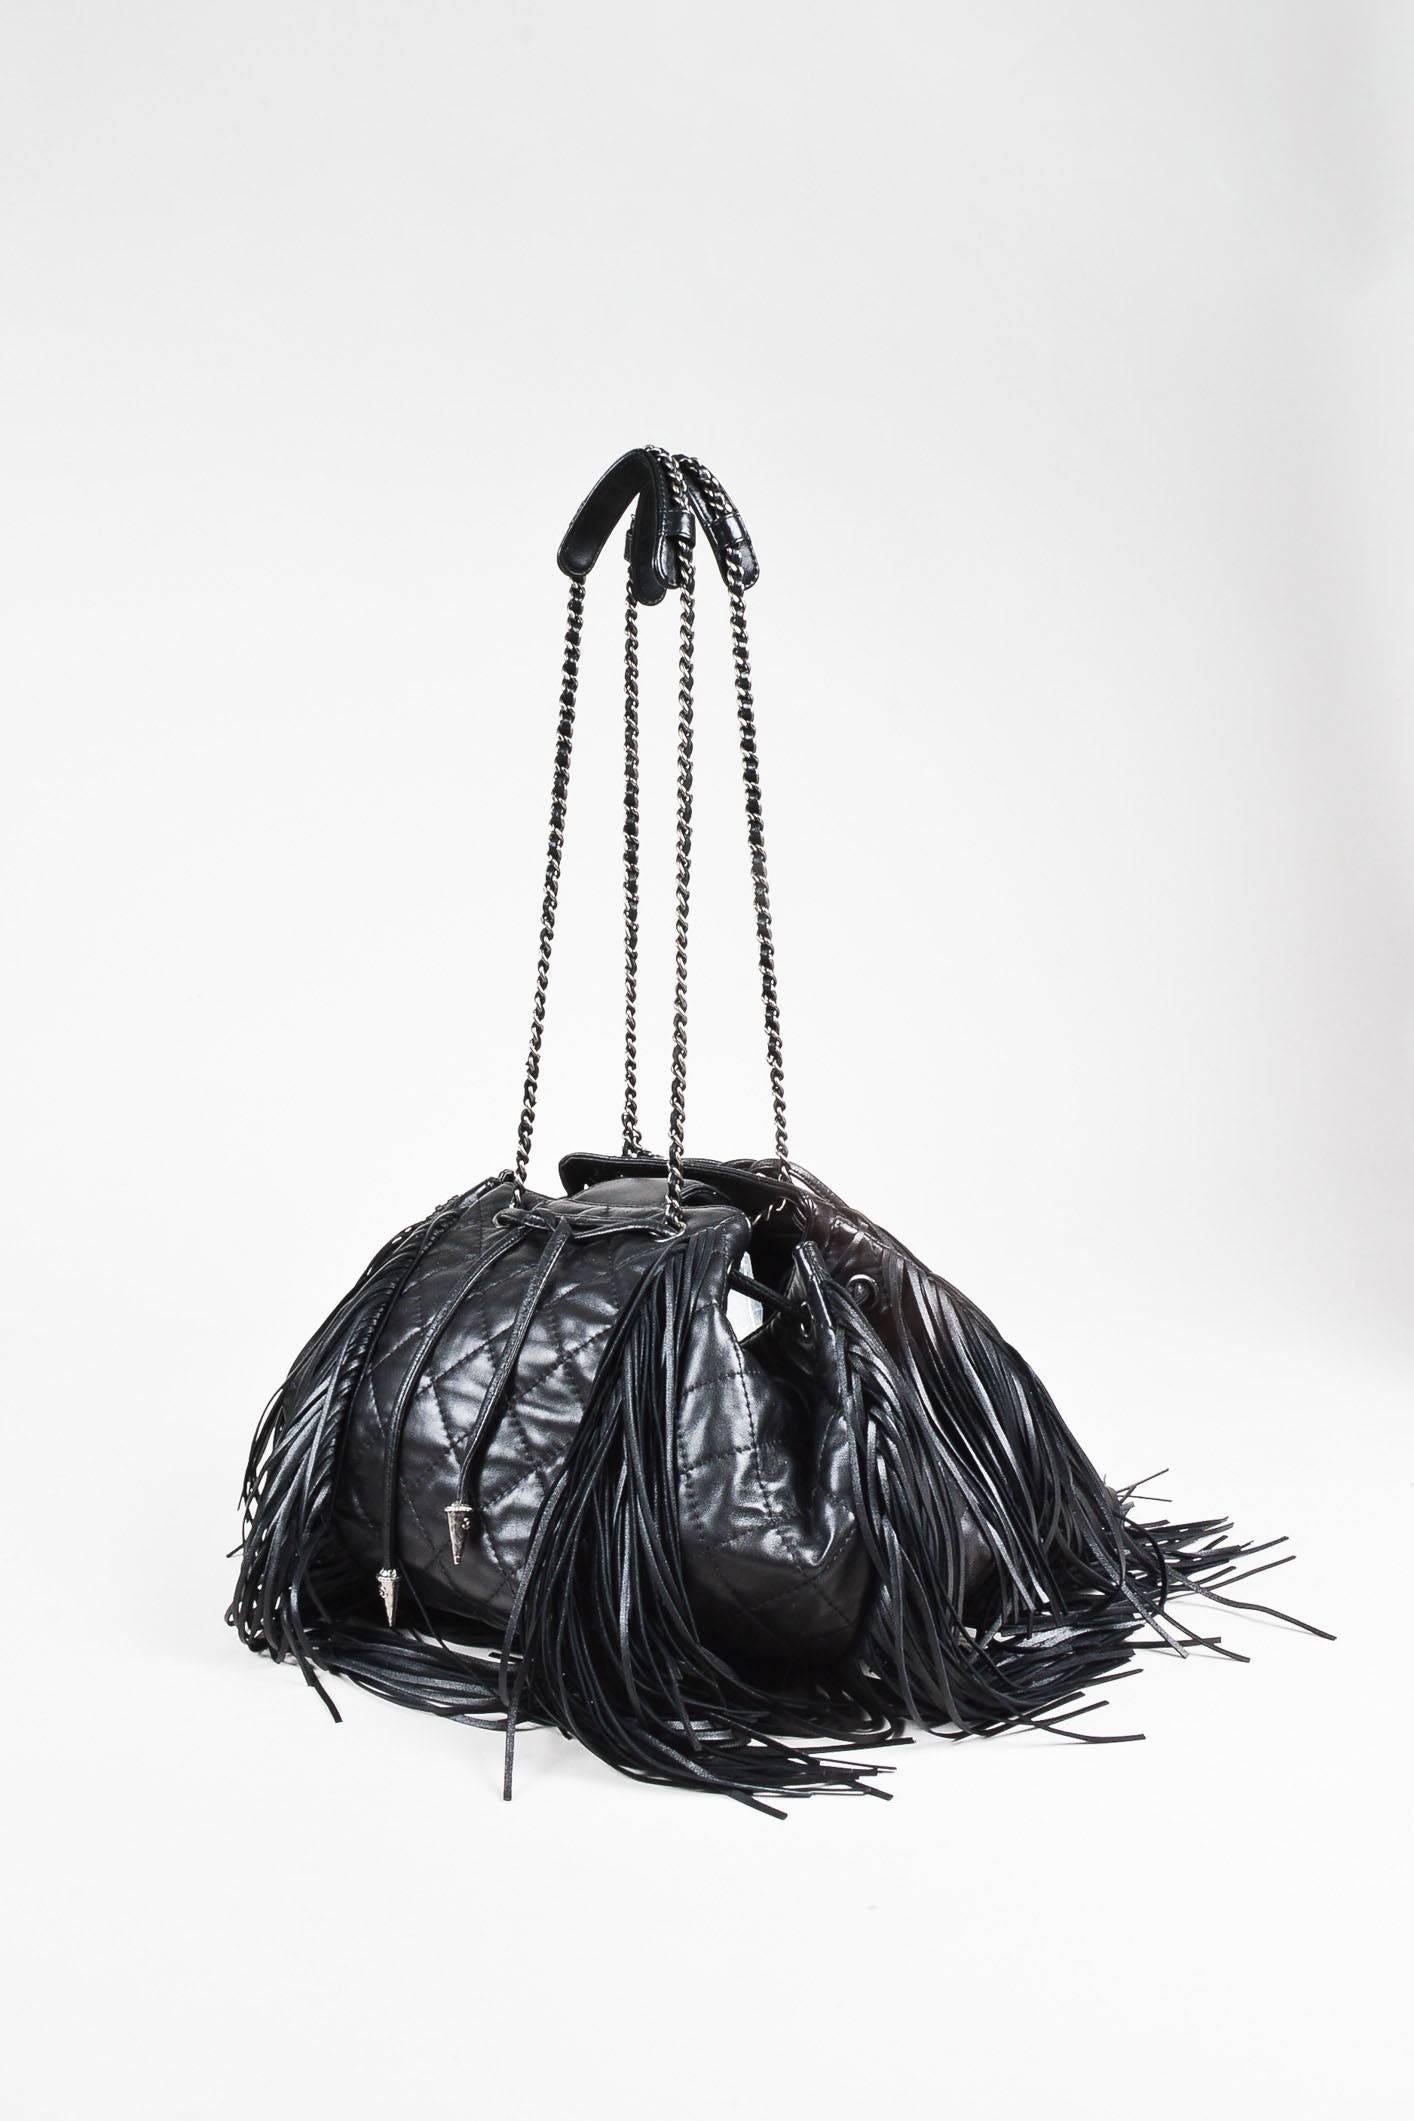 Comes with dust bag and autentication card. Black quilted lambskin leather "Paris-Dallas" drawstring bucket bag from Chanel circa 2014 features layers of fringe. Circular base. Drawstring ties at the upper front with silver-tone spikes at